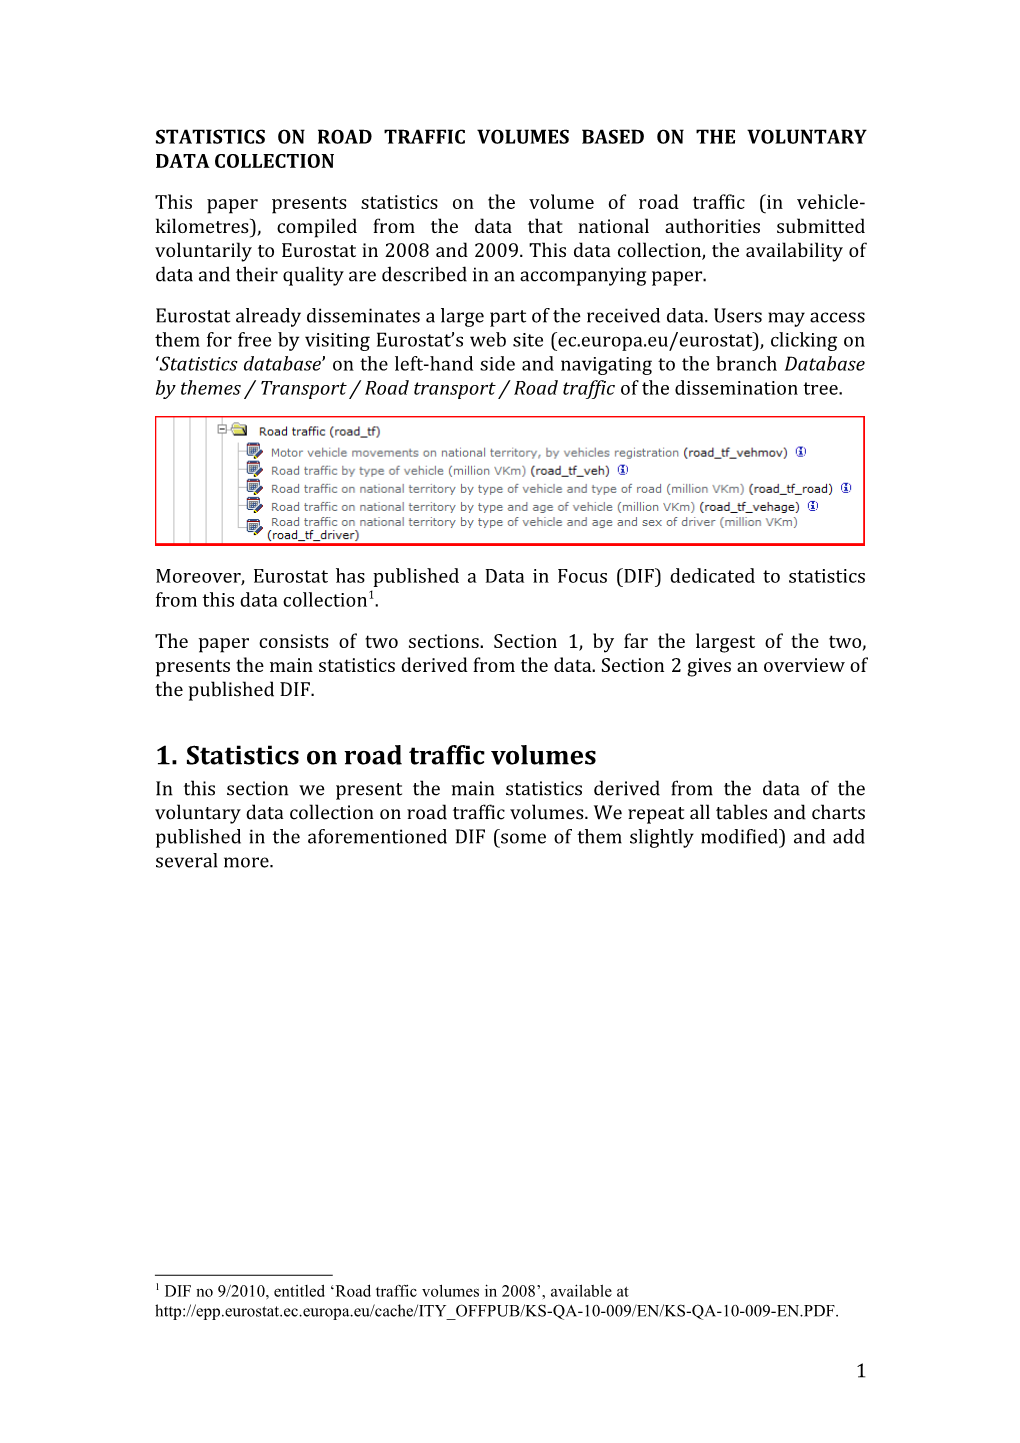 Statistics on Road Traffic Volumes Based on the Voluntary Data Collection